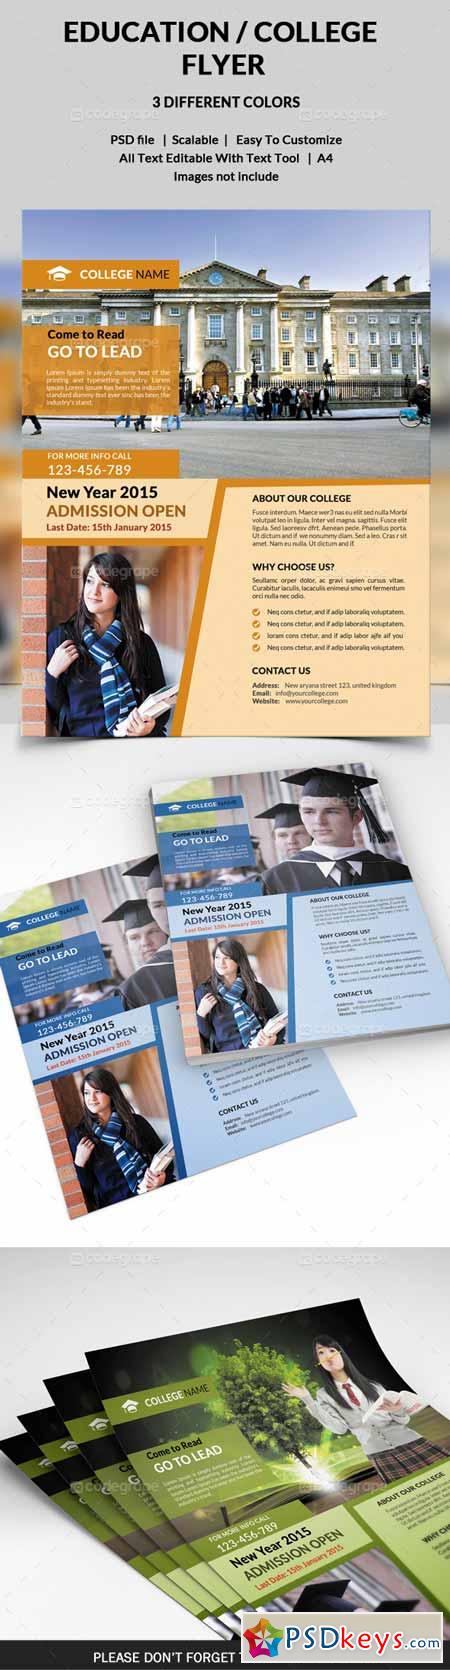 Education Flyer Template 5152